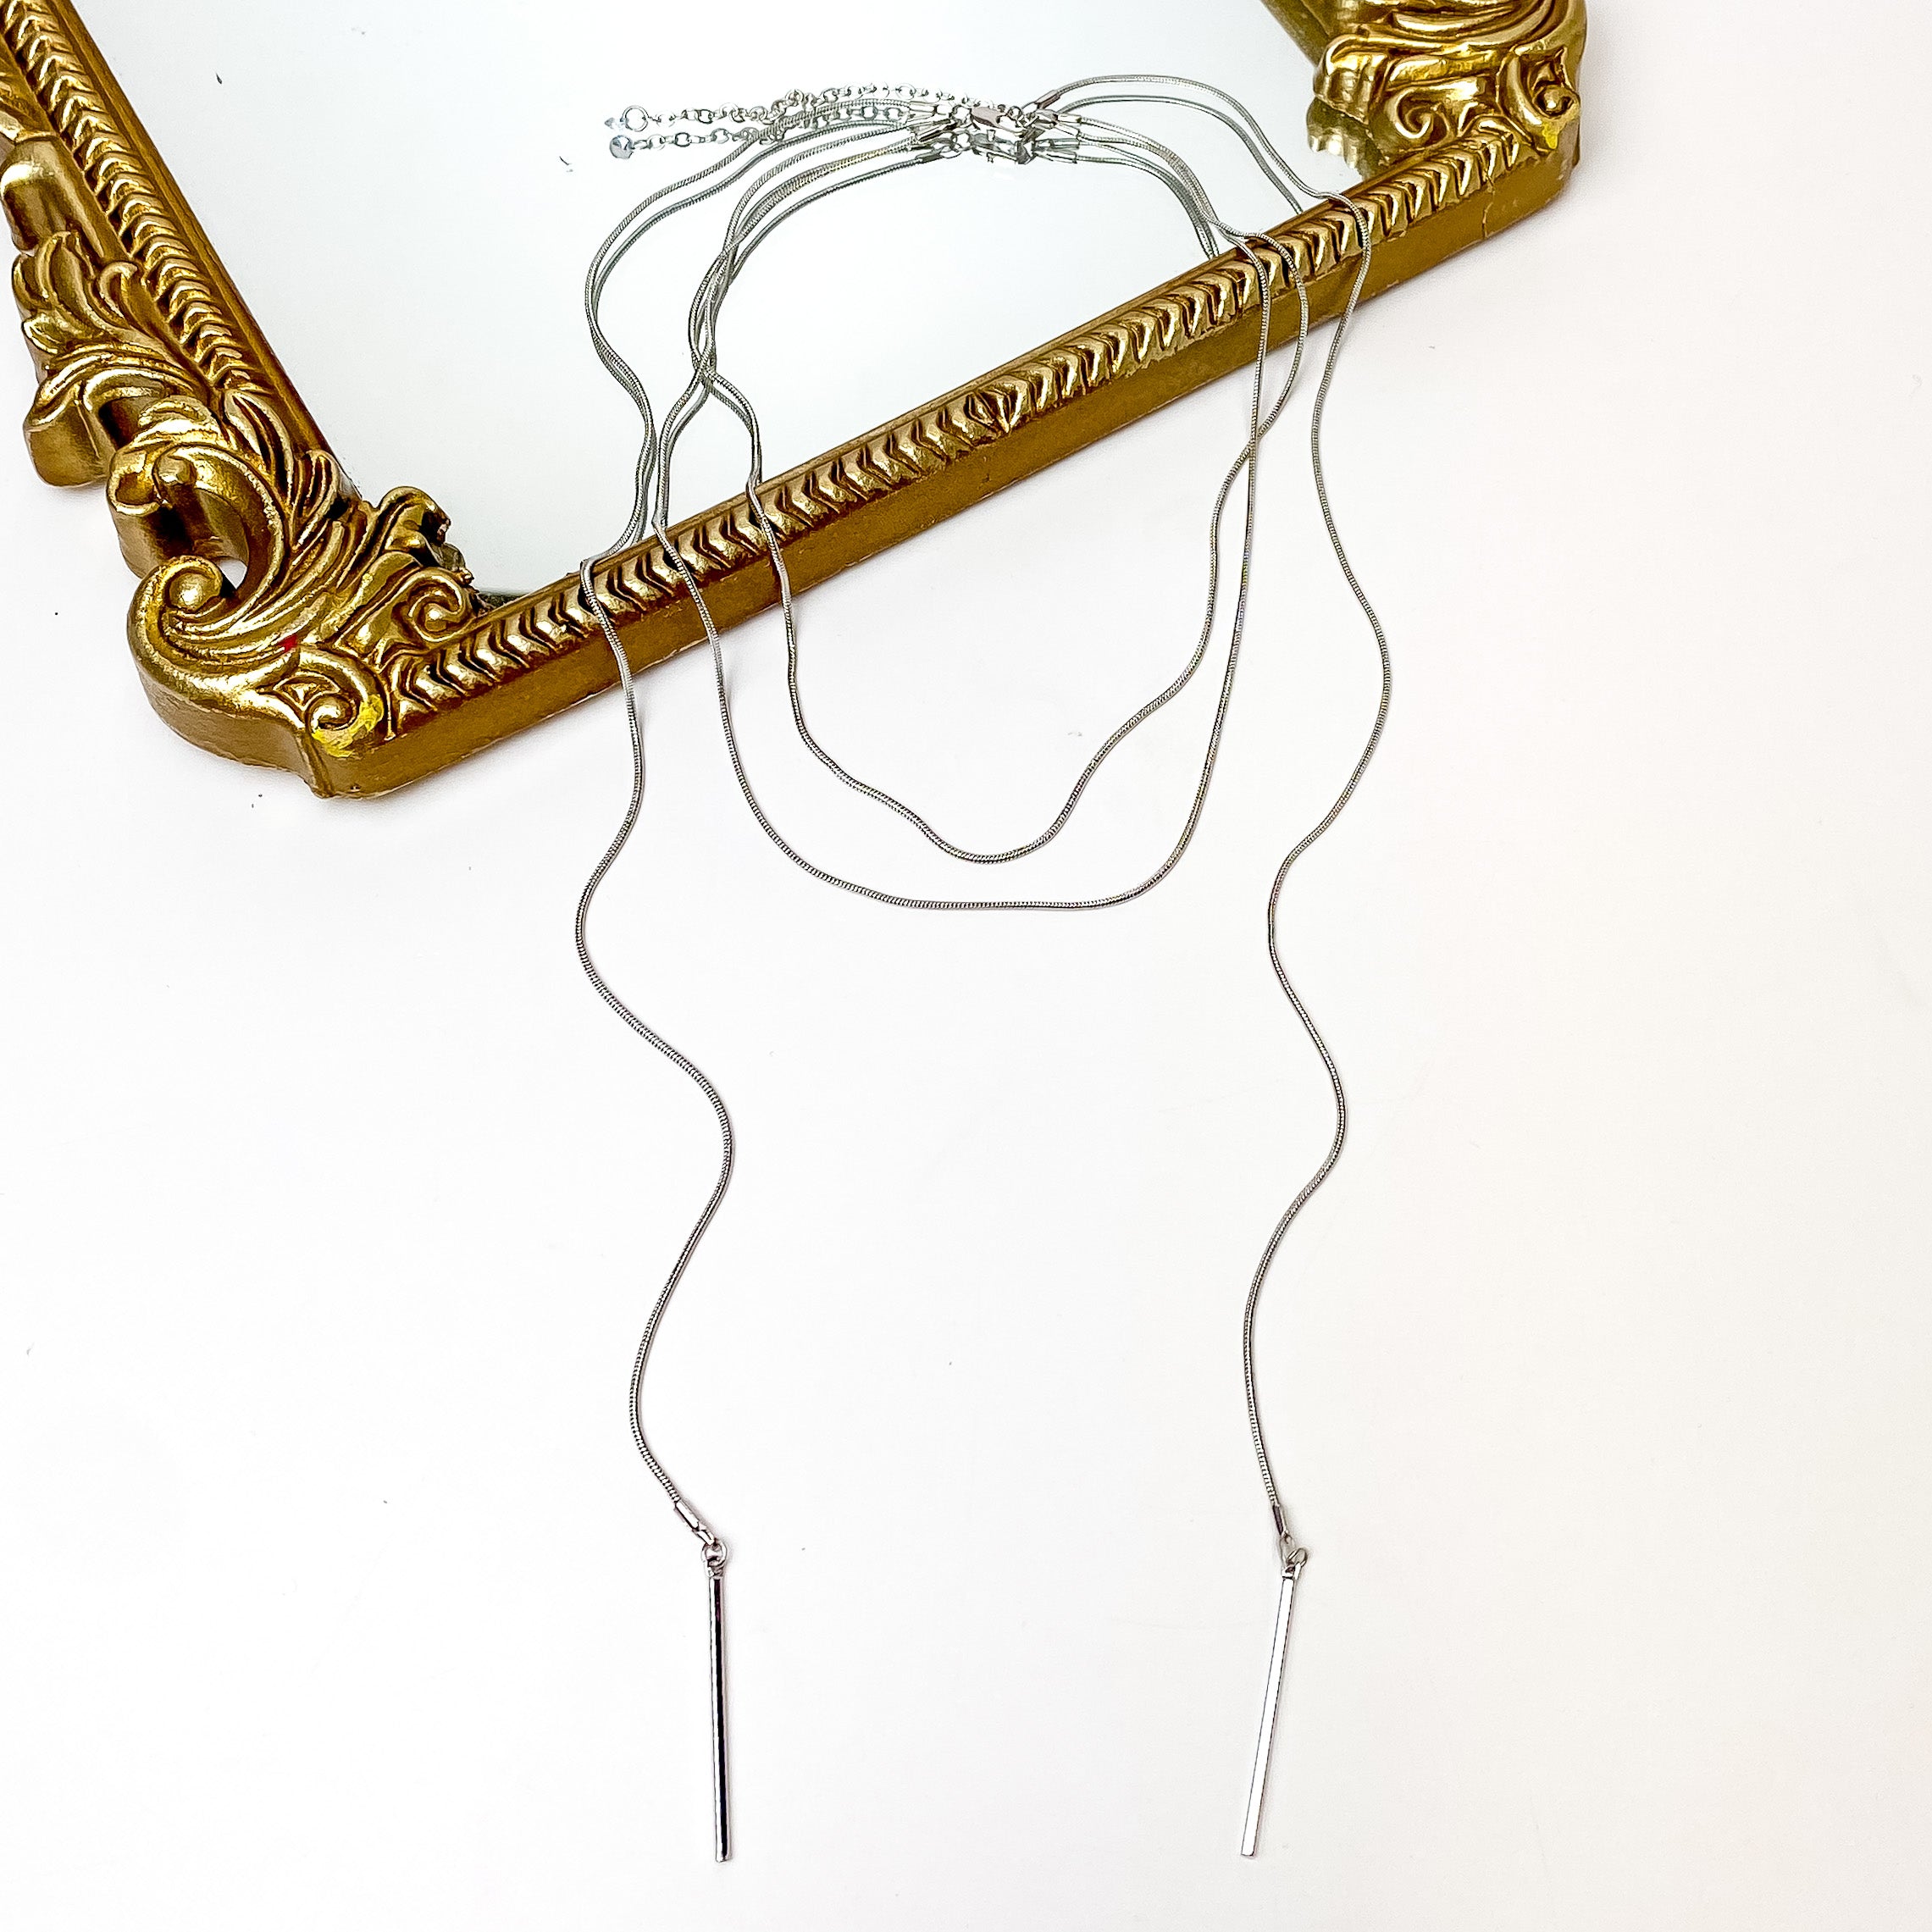 Wrap Around Necklace With Metal Accessory in Silver Tone. Pictured on a white background with part of the necklace laying on a mirror with a gold trim.